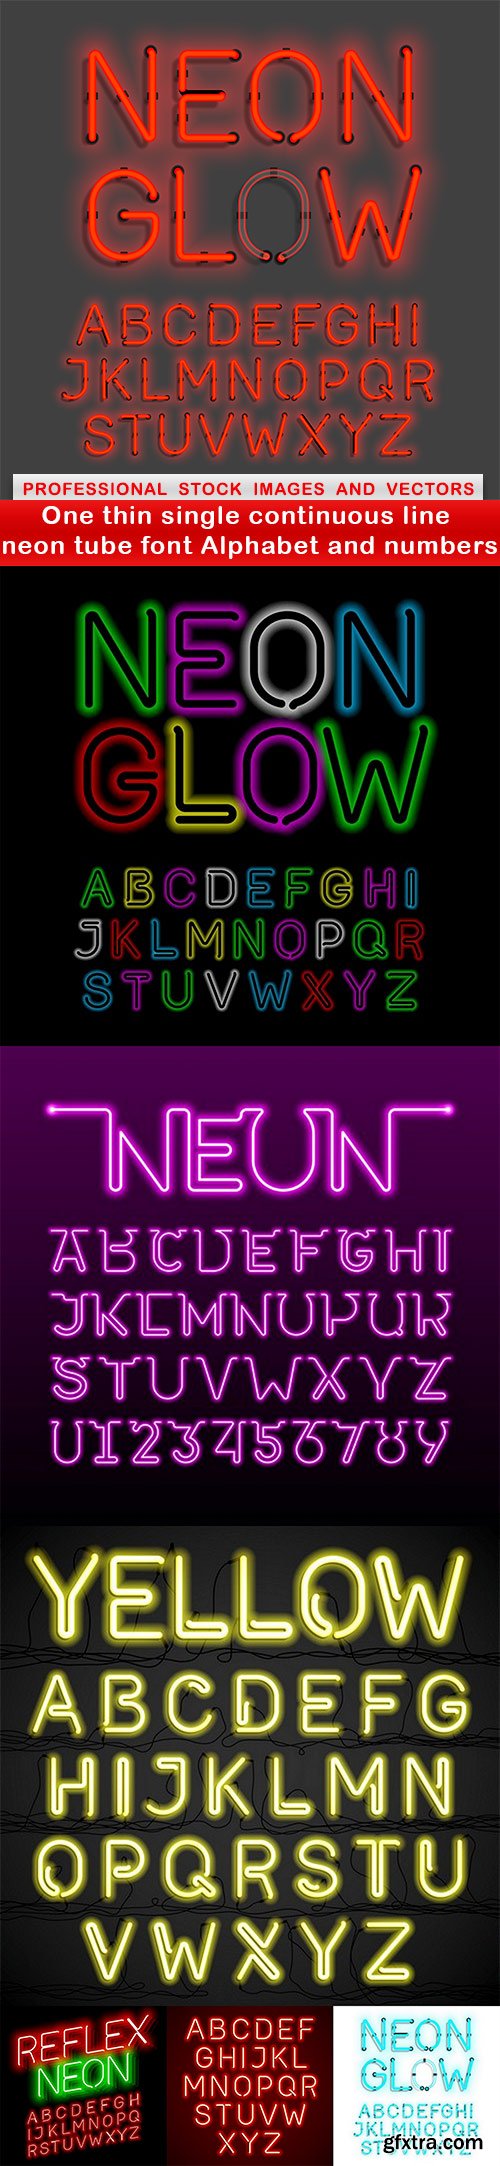 One thin single continuous line neon tube font Alphabet and numbers - 7 EPS